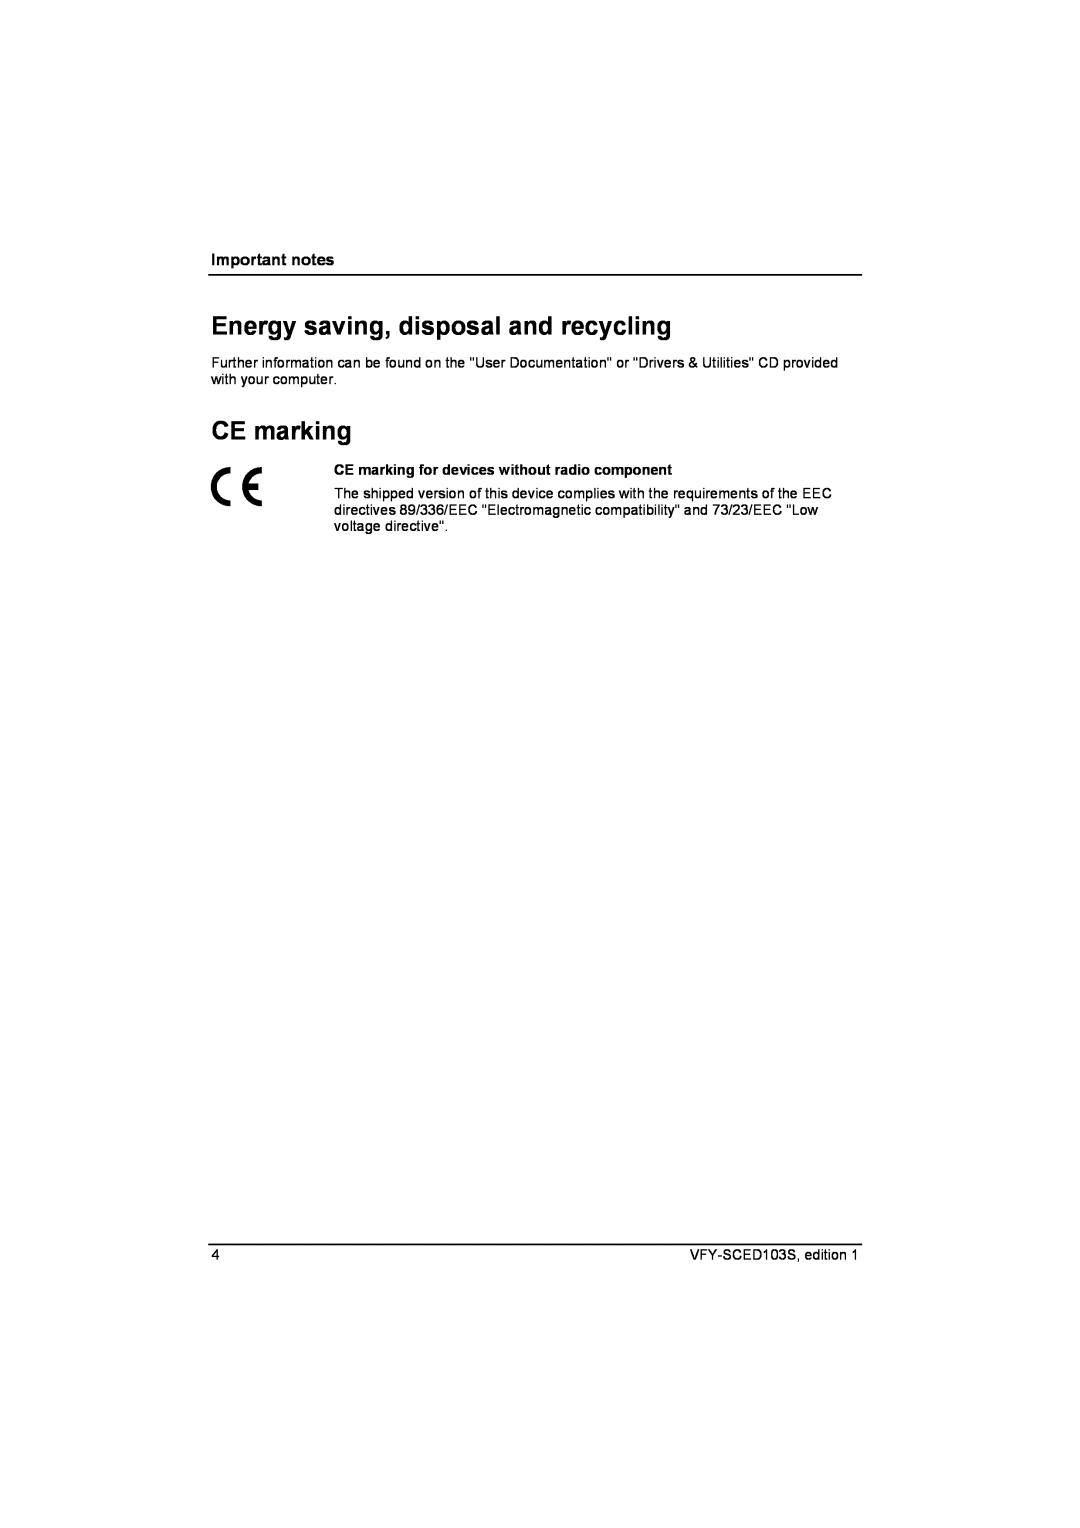 Fujitsu Siemens Computers X103 SFF manual Energy saving, disposal and recycling, CE marking, Important notes 